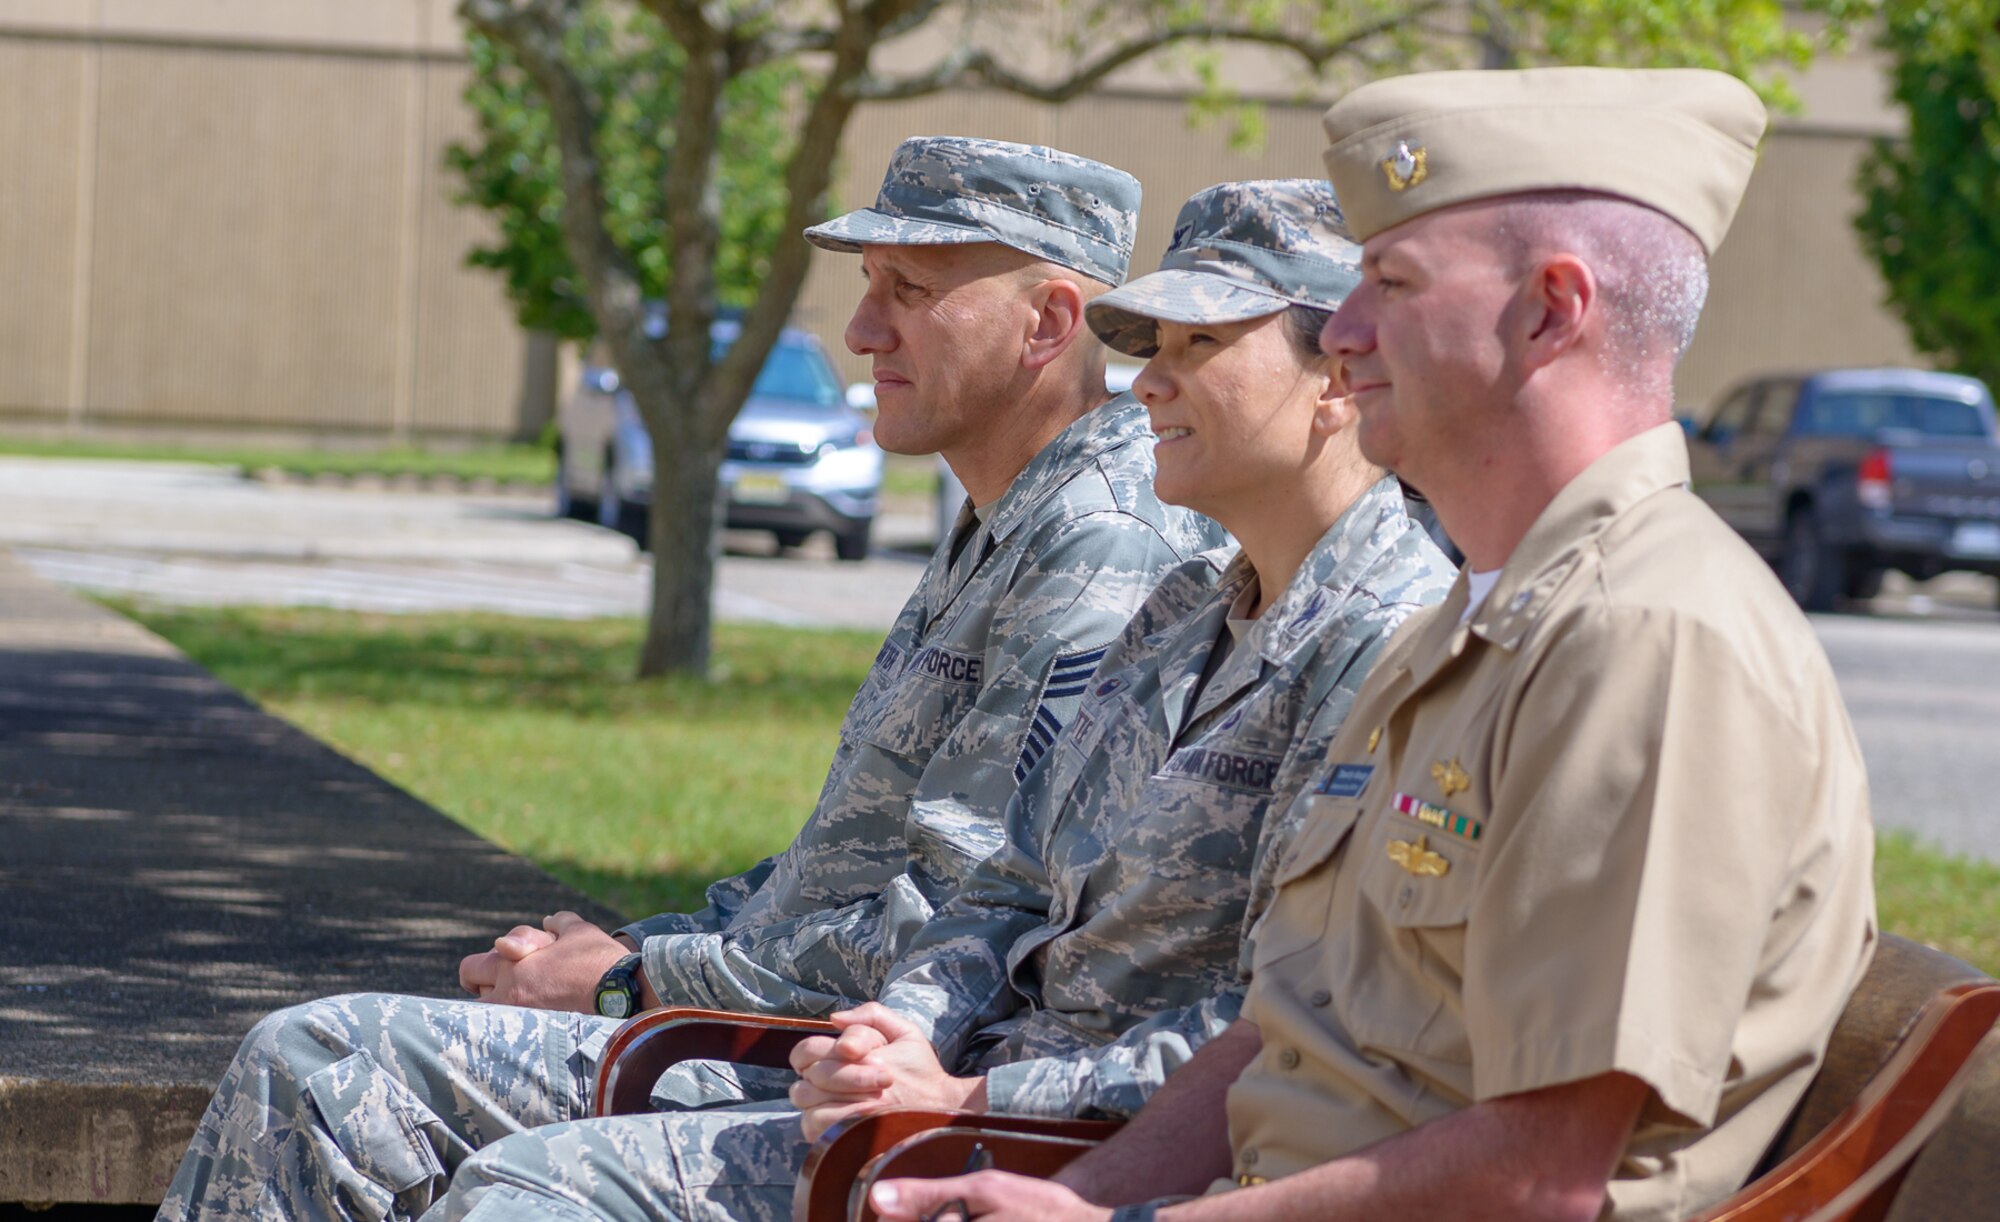 U.S. Air Force Chief Master Sgt. Ken Carter (left) and Col. Debra Lovette (center) attend the Center for Naval Aviation Technical Training Unit Keesler’s Chief Petty Officer Birthday Ceremony at Keesler Air Force Base, Mississippi, April 5, 2018. The U.S. Navy’s Chief Petty Officers are celebrating 125 years of heritage and the naval tradition of Unity, Service and Navigation, which is part of their rate emblem, is symbolized by a fouled anchor with the letters “USN” centered on the anchor. (U.S. Air Force photo by André Askew)